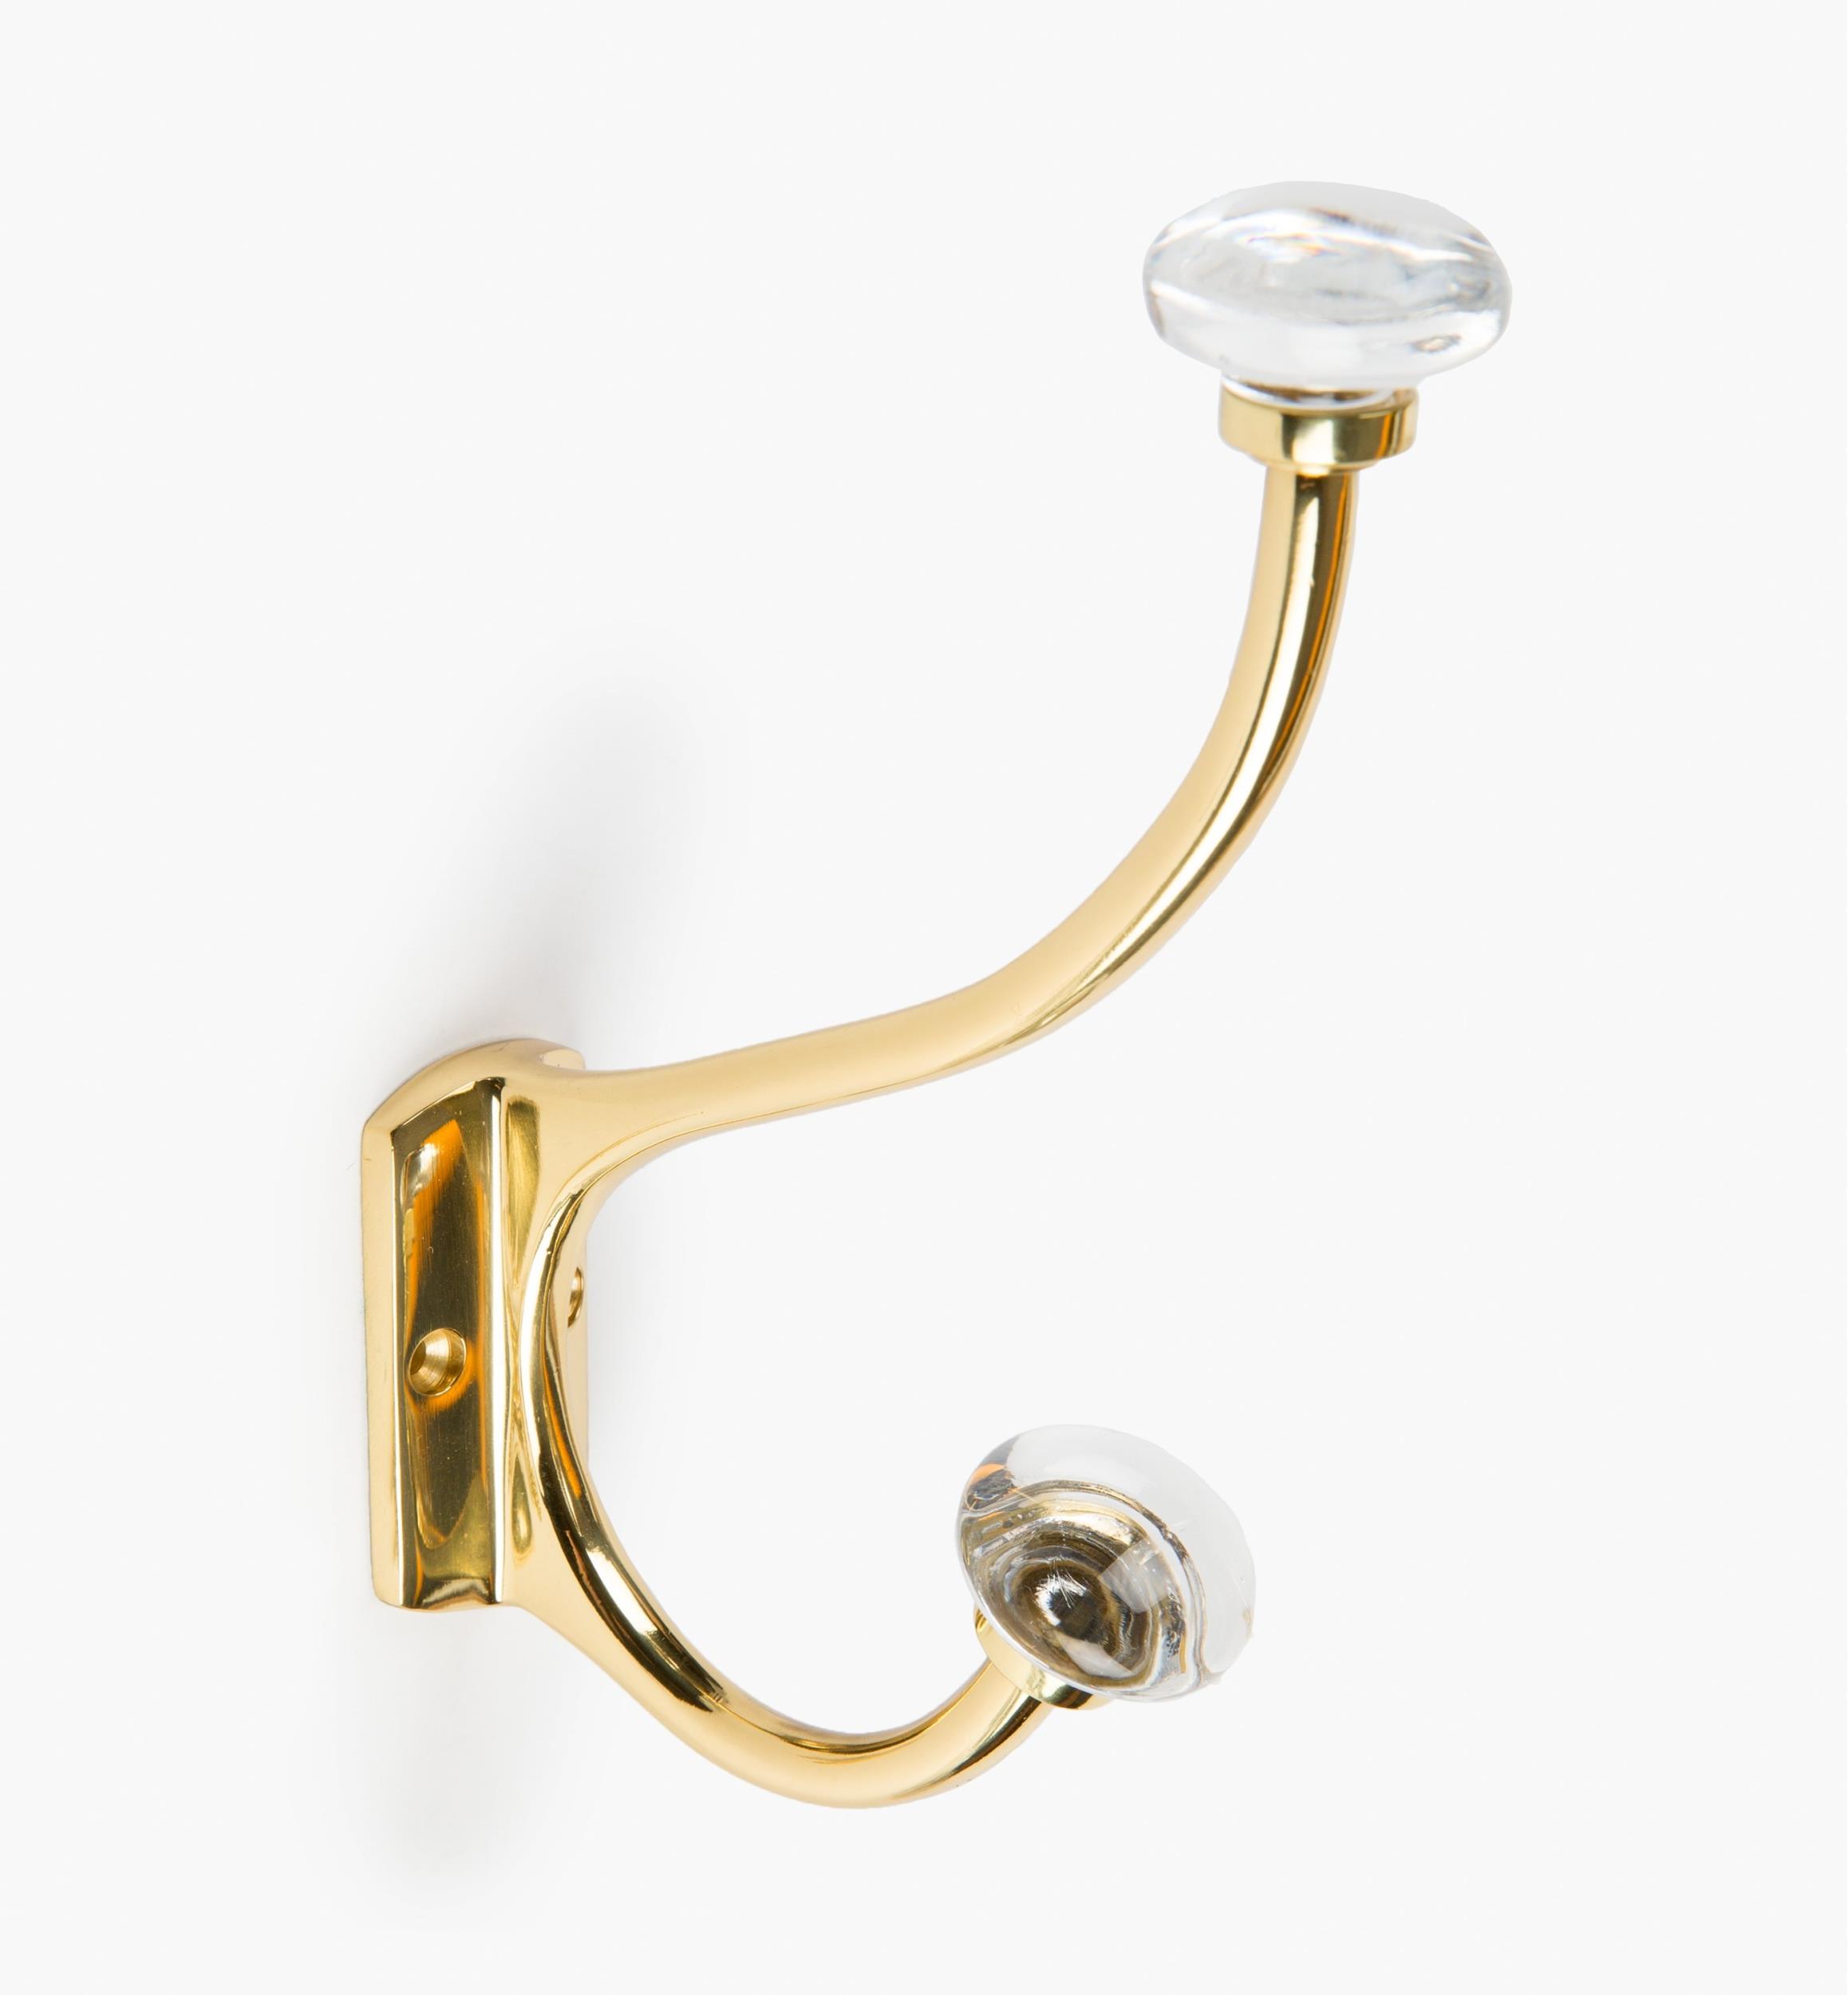 https://assets.leevalley.com/Size5/10007/00W8550-polished-brass-coat-hook-with-plain-crystal-knobs-f-01-r.jpg